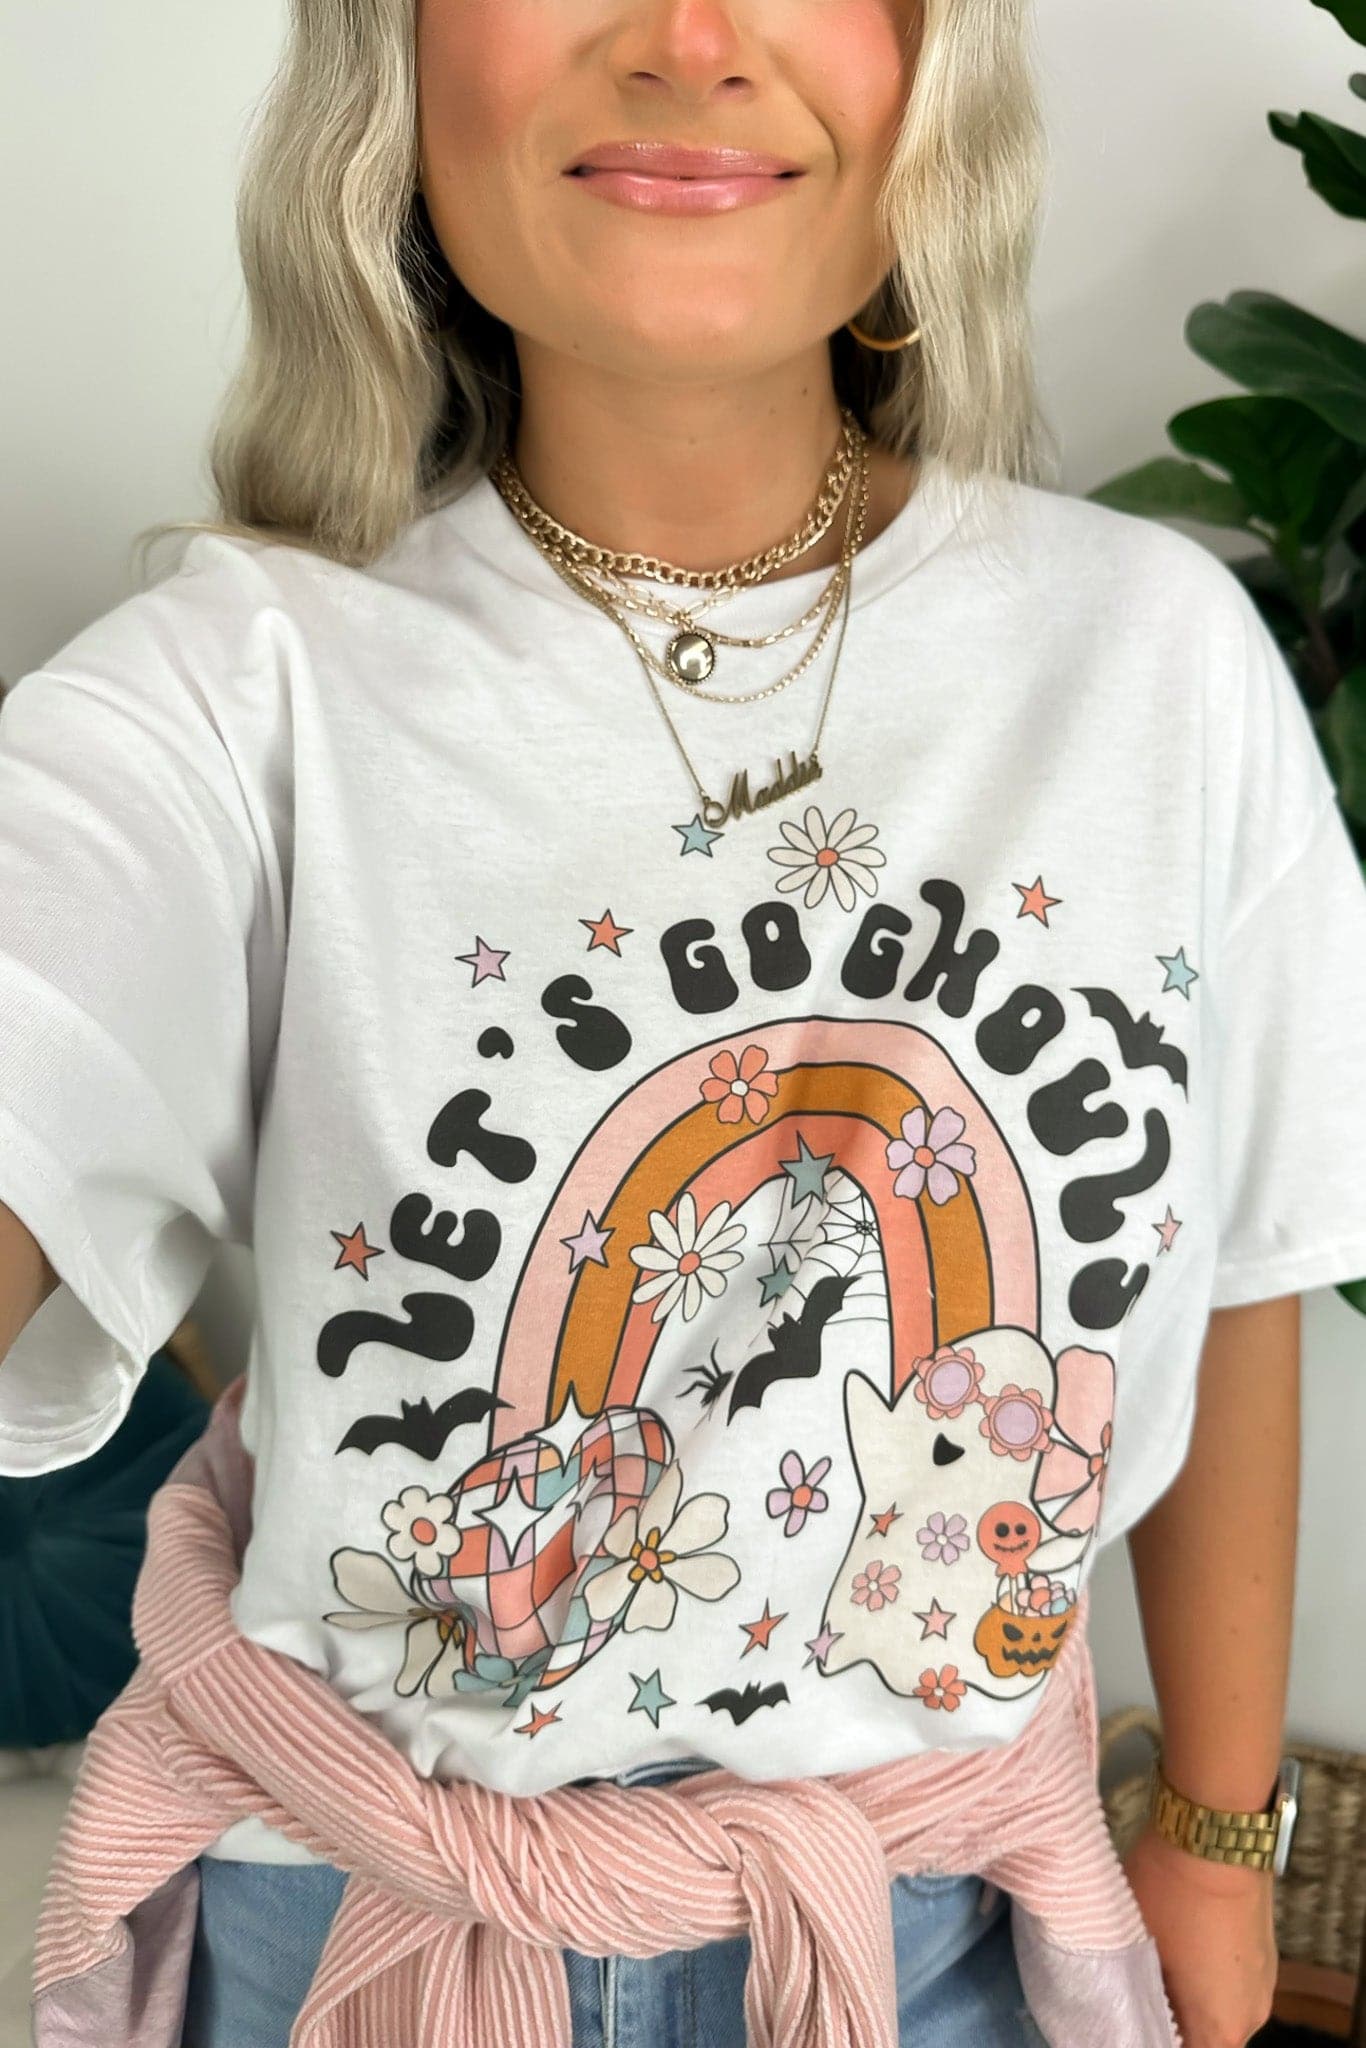  Let's Go Ghouls Graphic Tee - Madison and Mallory